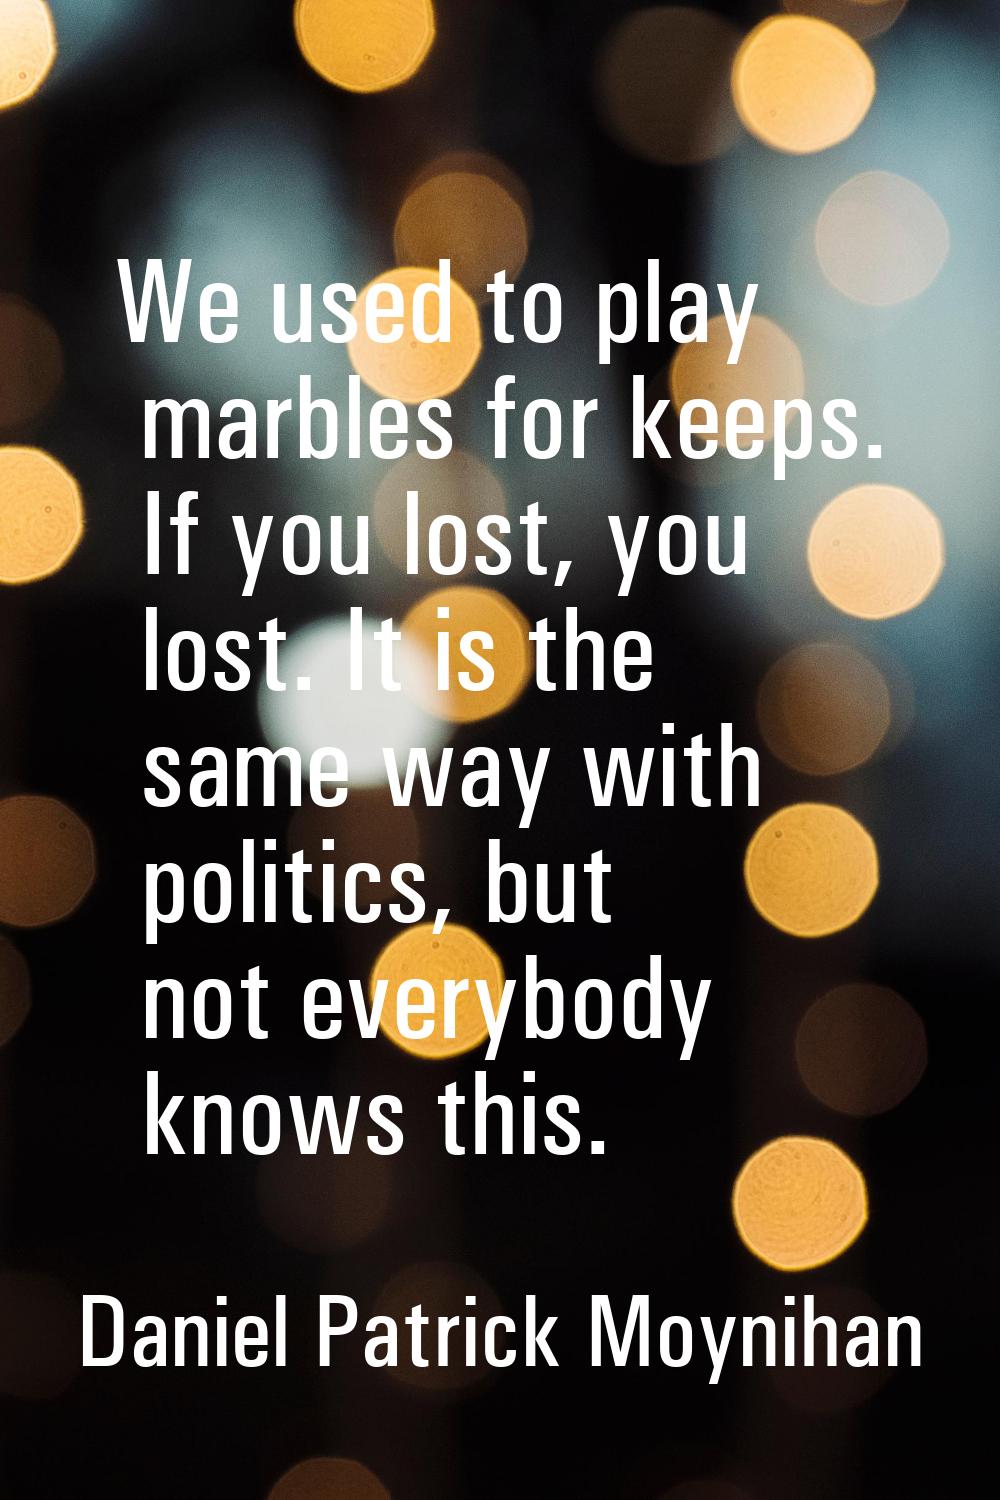 We used to play marbles for keeps. If you lost, you lost. It is the same way with politics, but not